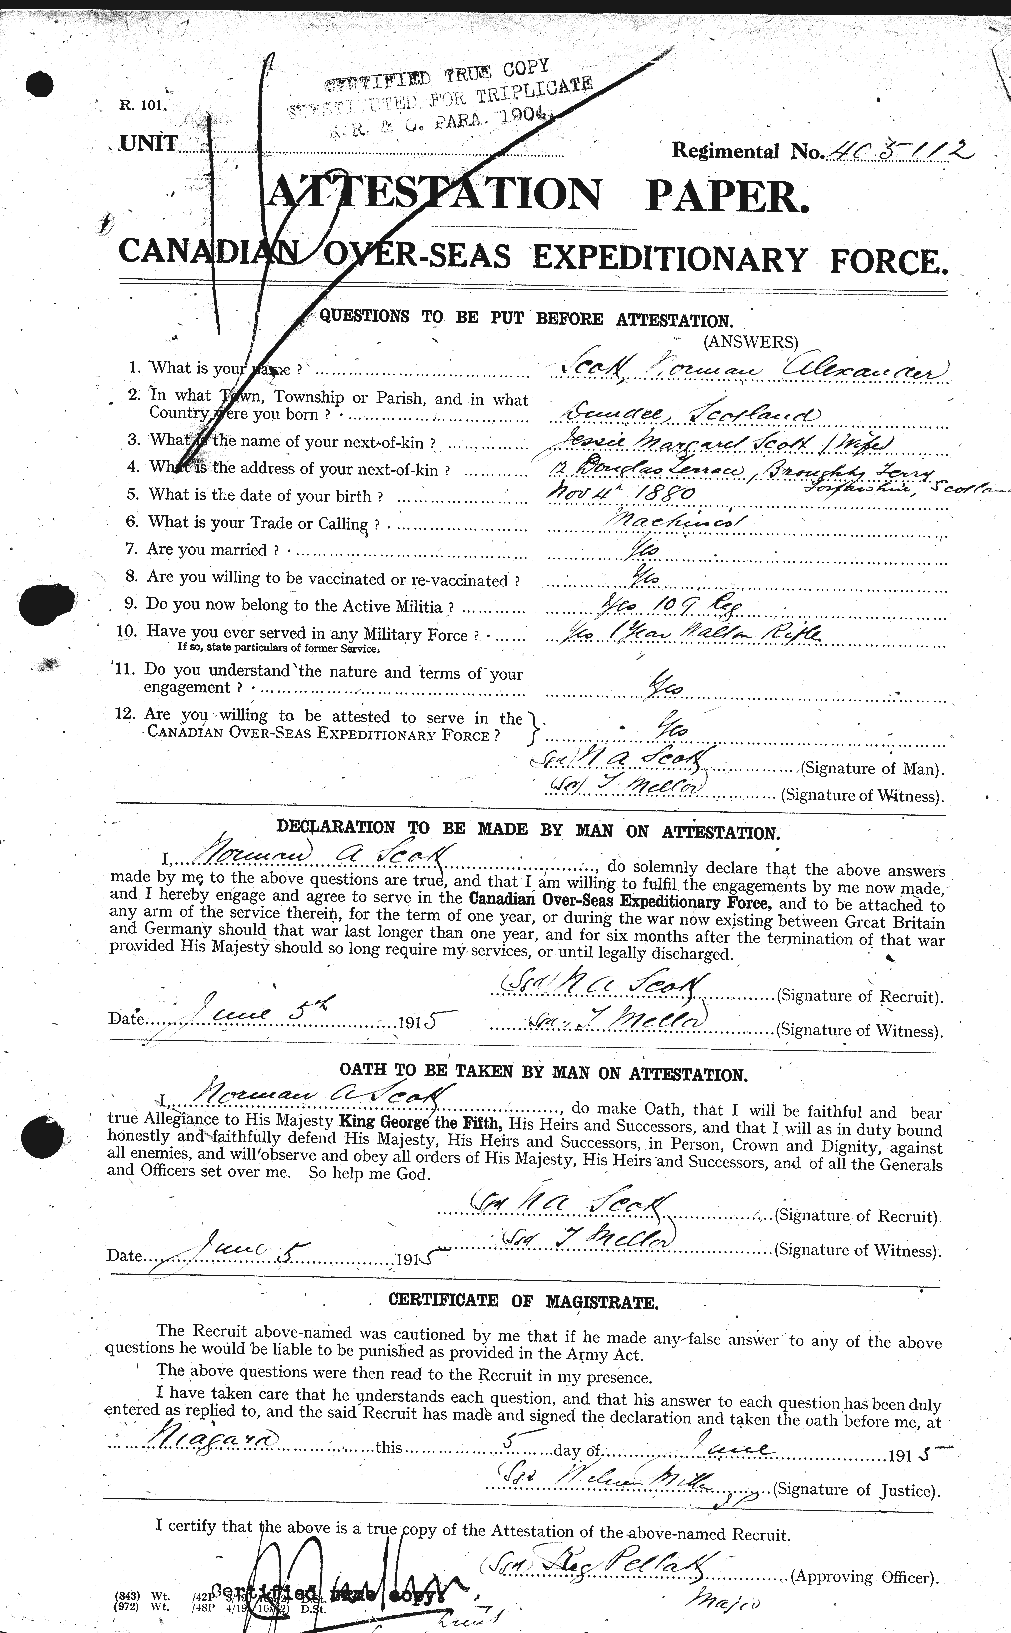 Personnel Records of the First World War - CEF 090243a